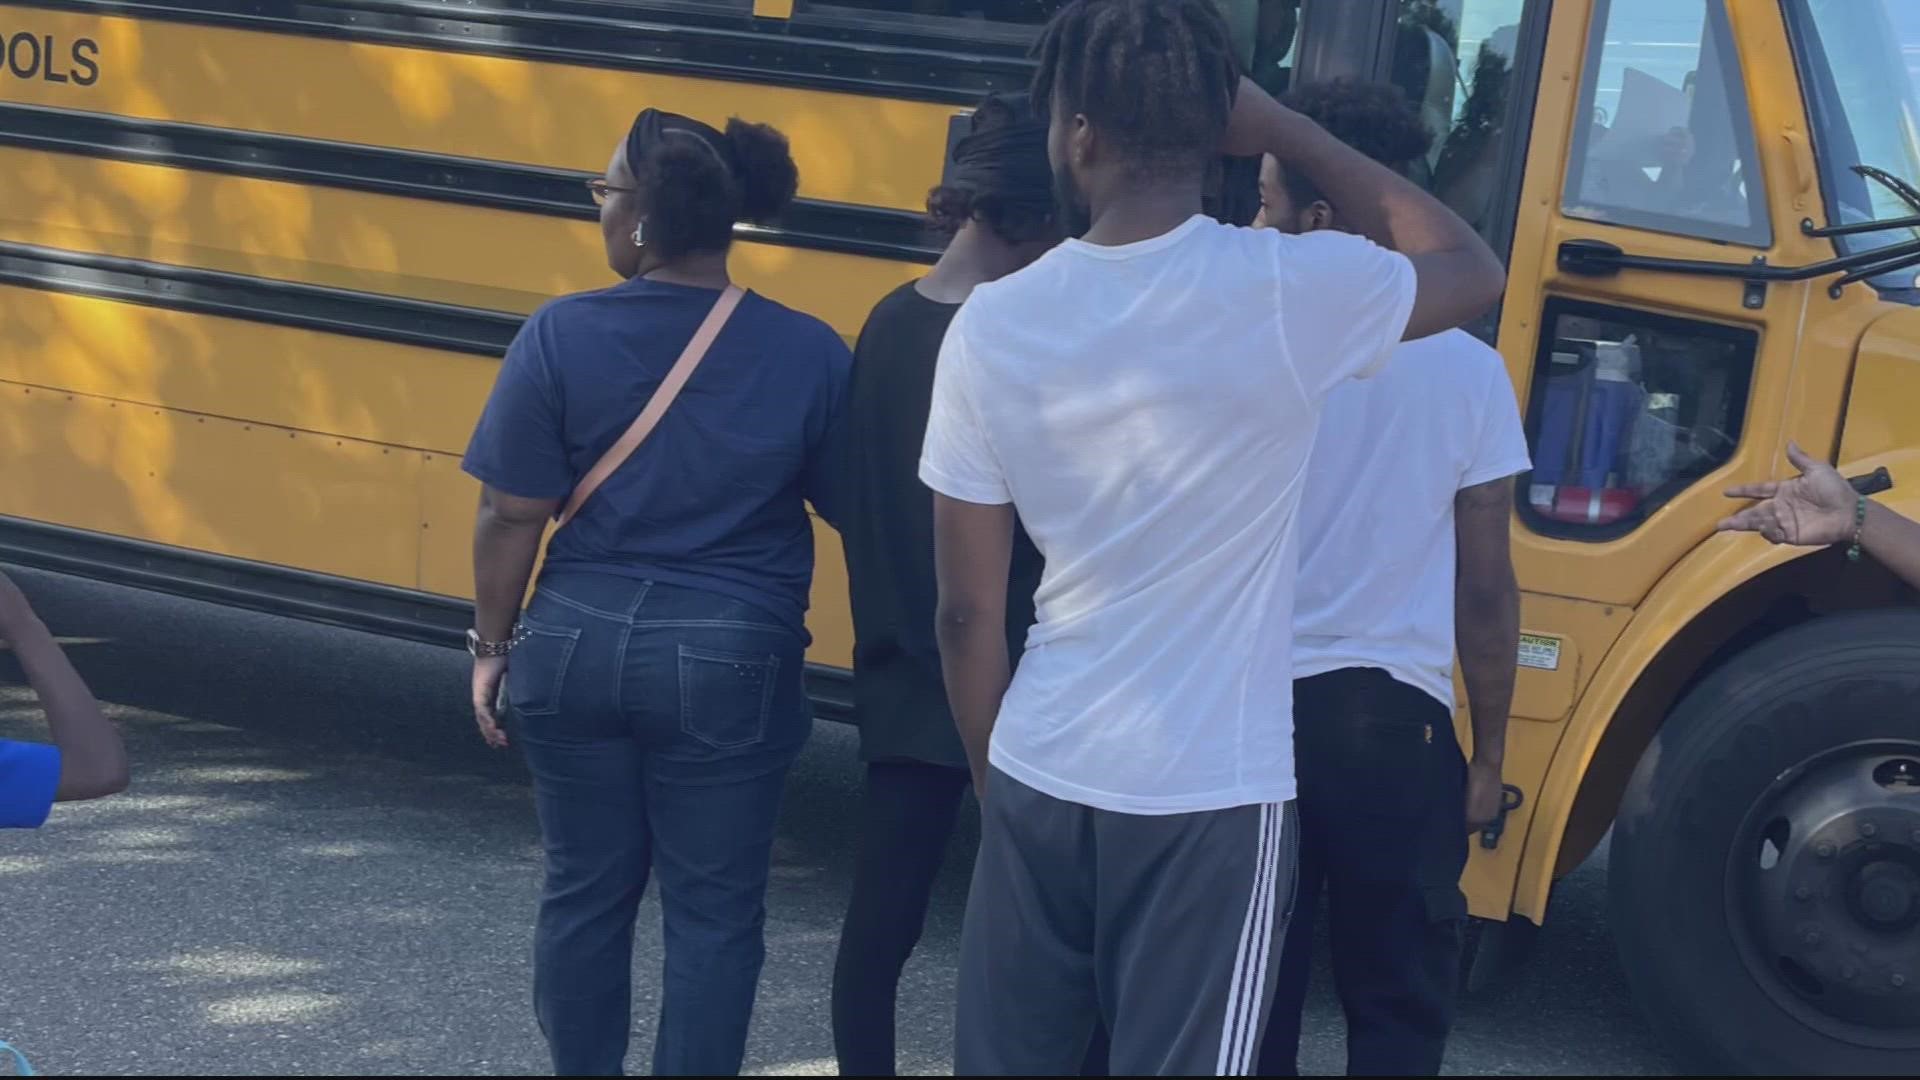 Parents in Dumfries are upset after police say a bus driver ran over a father who wanted to pick up his child. The dad, who was injured, is now facing charges